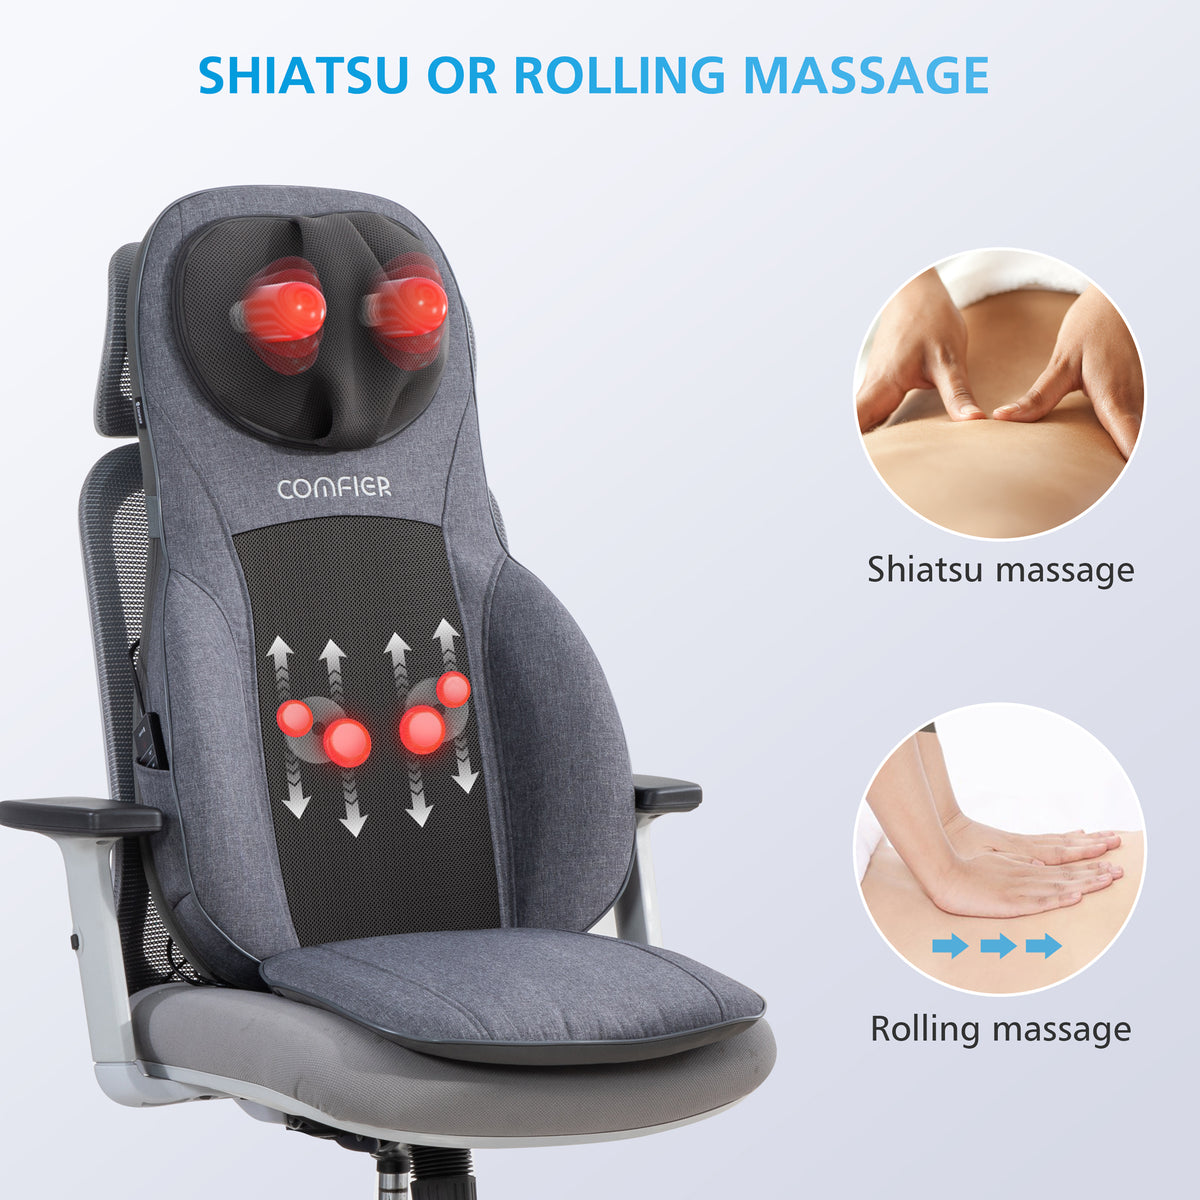 Adjustable Cooling Car Seat Cushion with Lower Back Massage - 2401 – Comfier